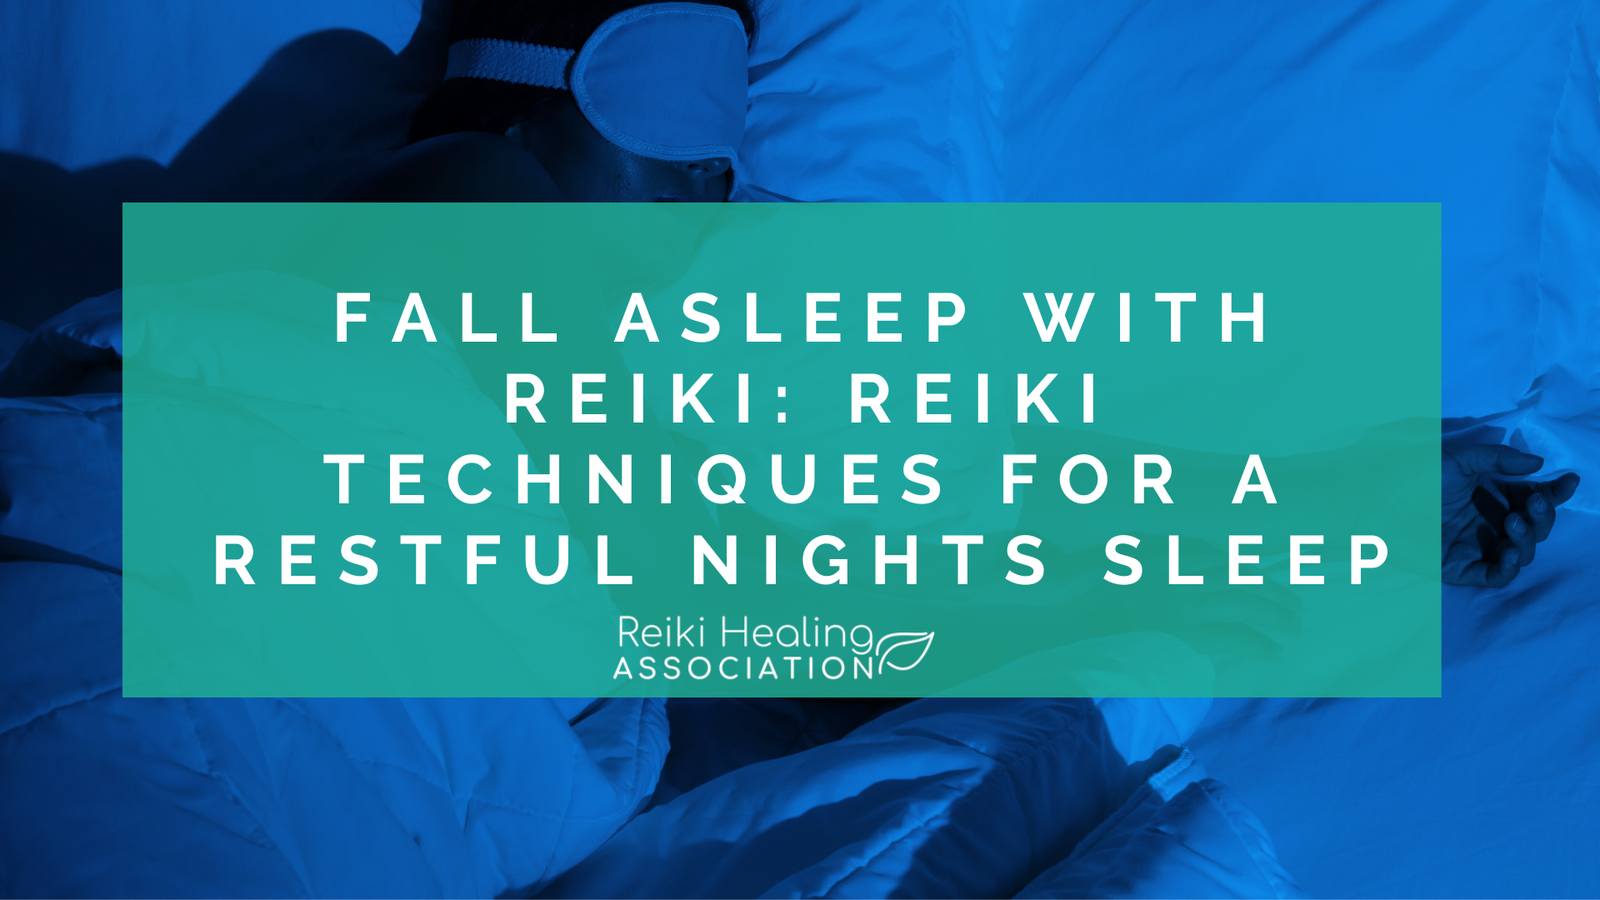 Fall Asleep with Reiki: Reiki Techniques for a Restful Nights Sleep